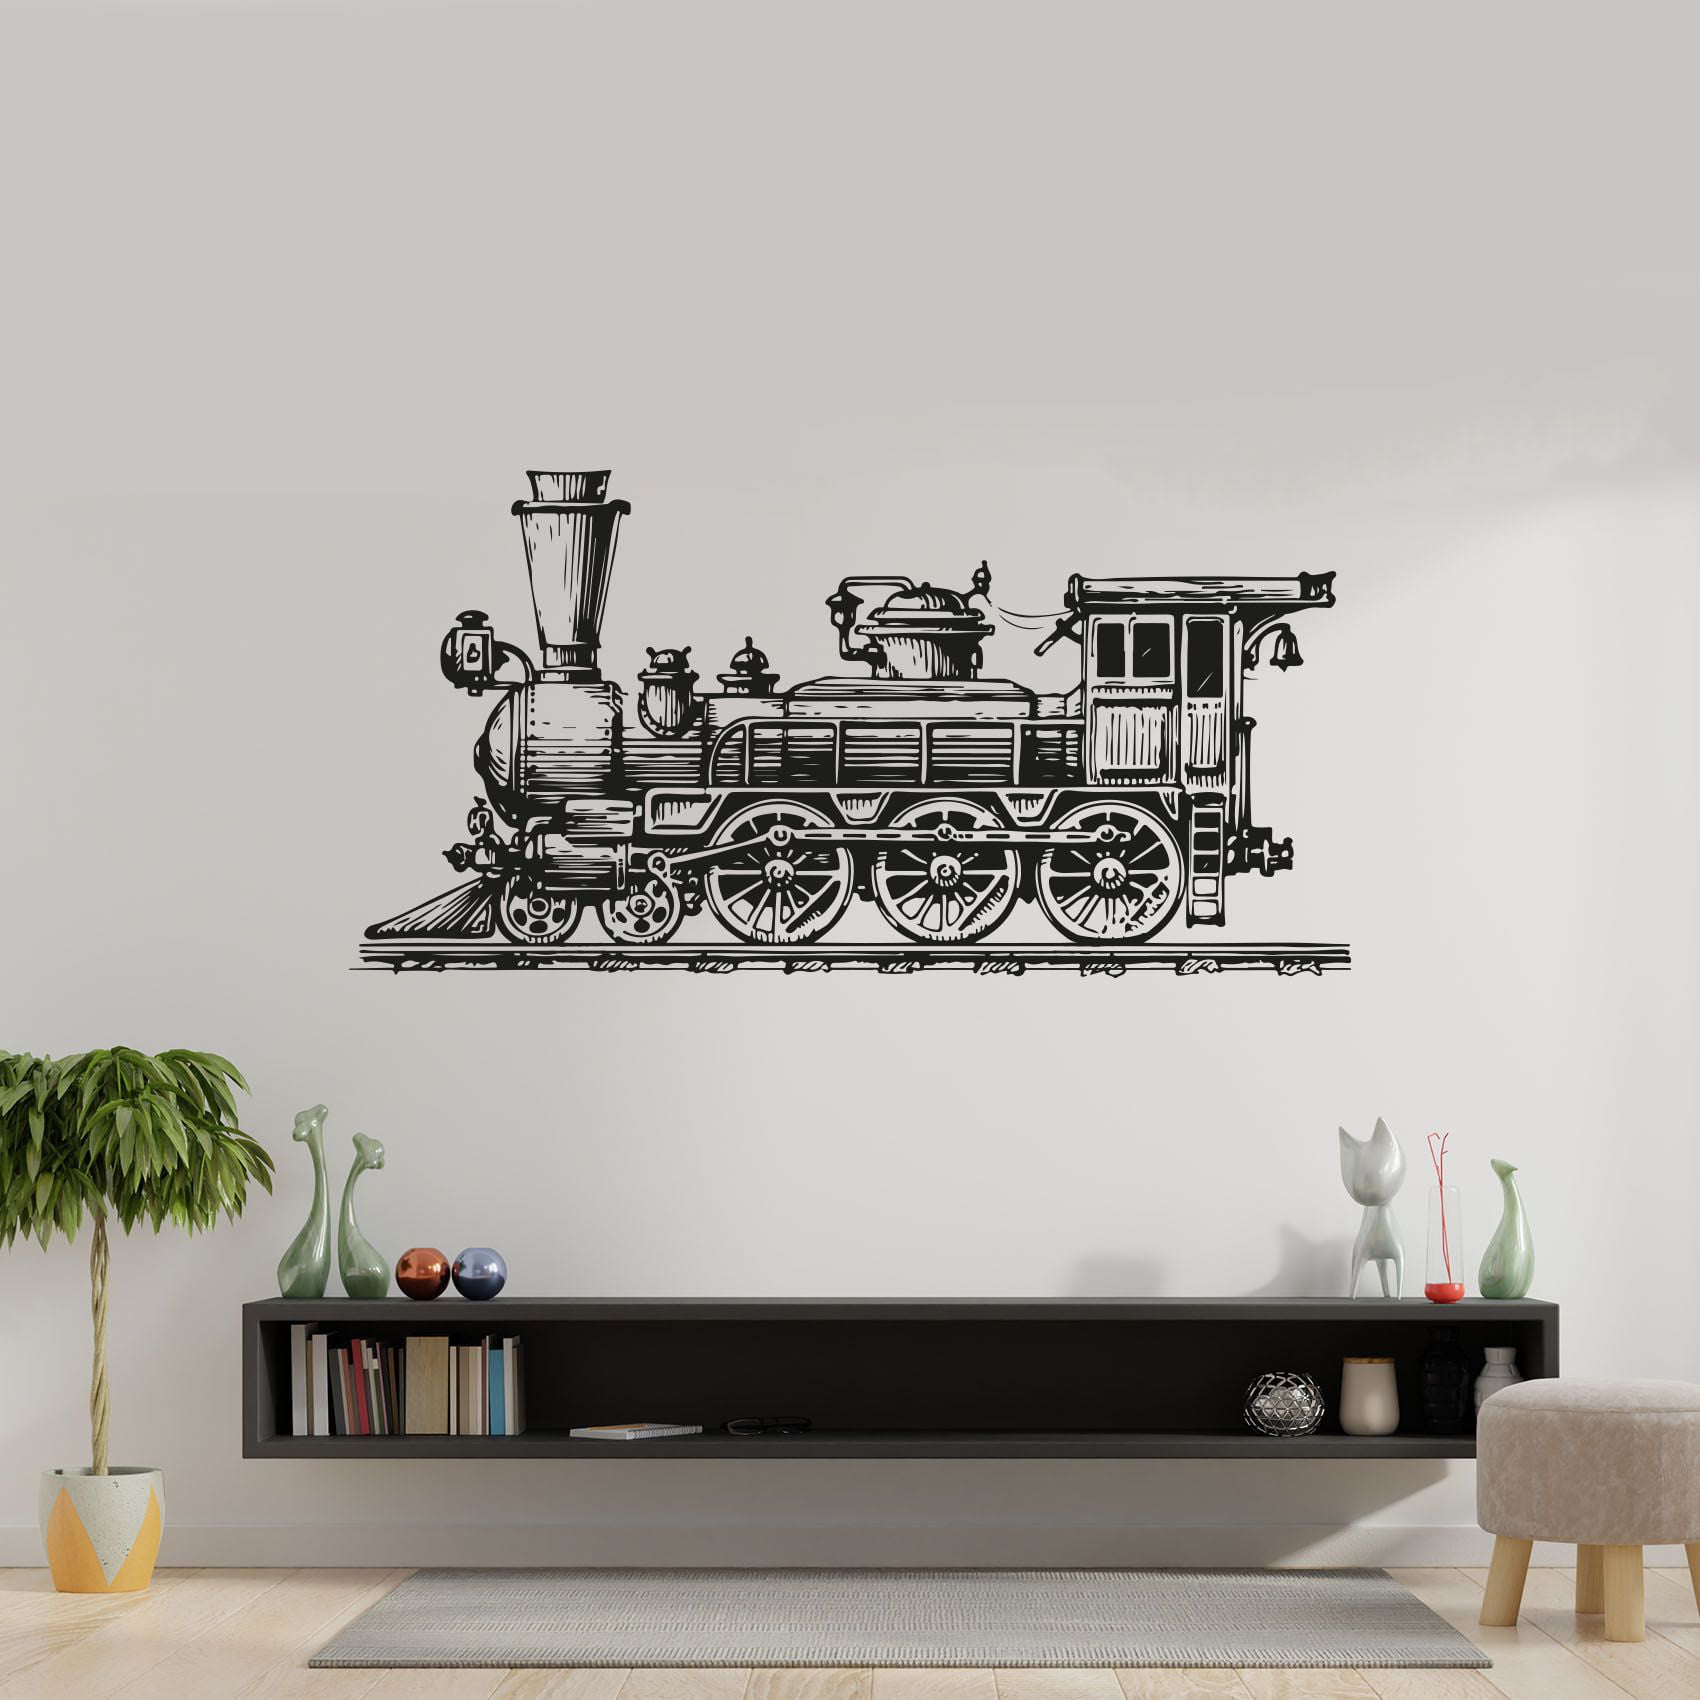 Old Train Vintage Silhouette Beautiful Steam Train Types Vinyl Wall Sticker Wall Decal Art Décor Home Room Kids Room Boys Girls Room Train Lover Living Decoration Size (16x40 inch) -